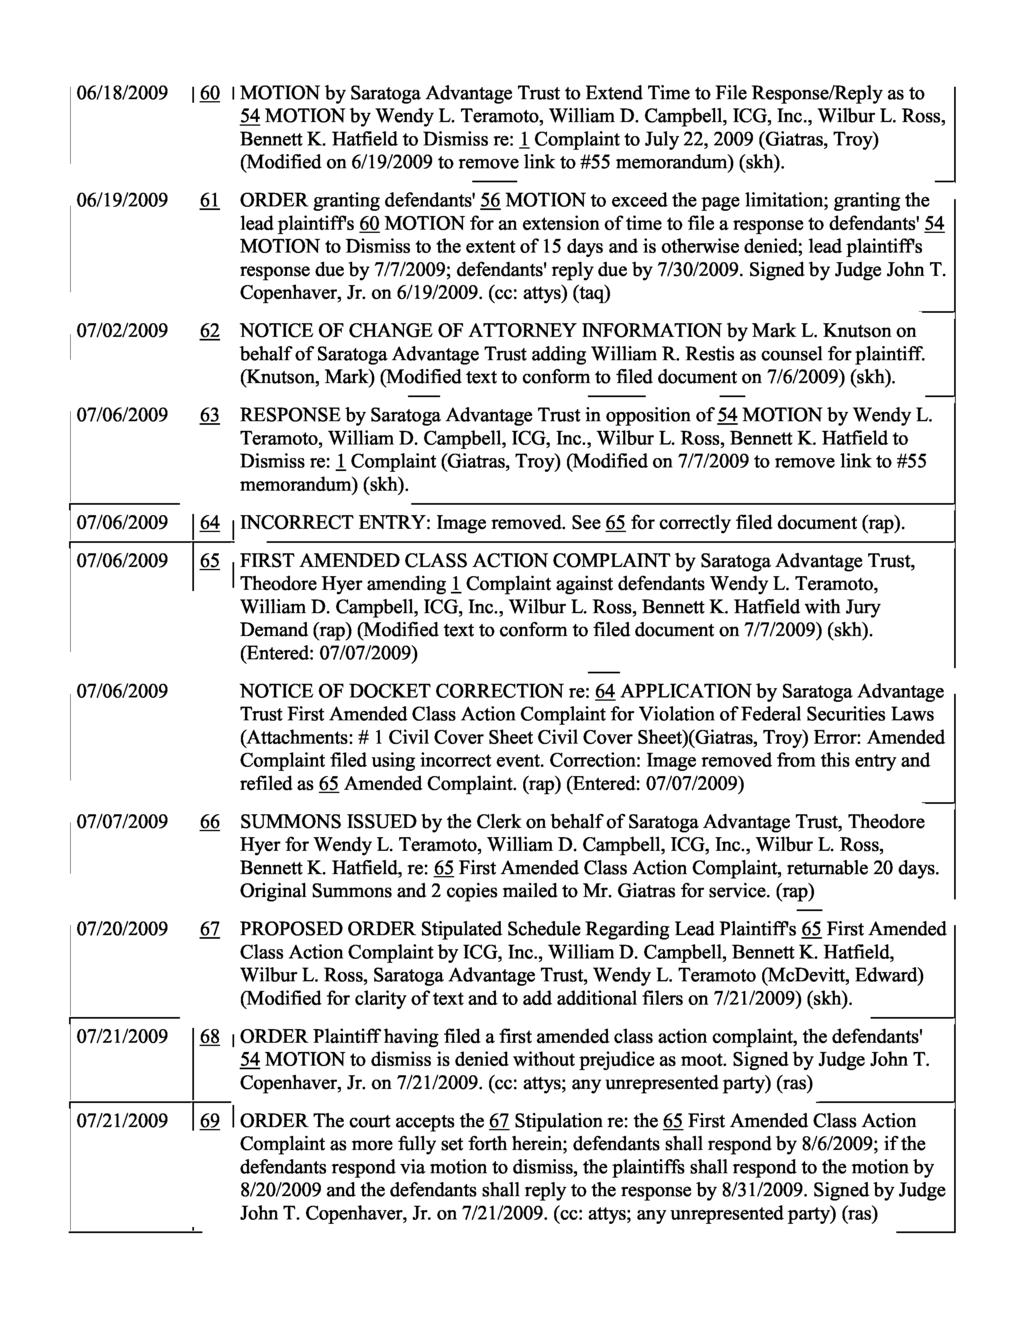 06/18/2009 1 60 1 MOTION by Saratoga Advantage Trust to Extend Time to File Response/Reply as to 54 MOTION by Wendy L. Teramoto, William D. Campbell, ICG, Inc., Wilbur L. Ross, Bennett K.